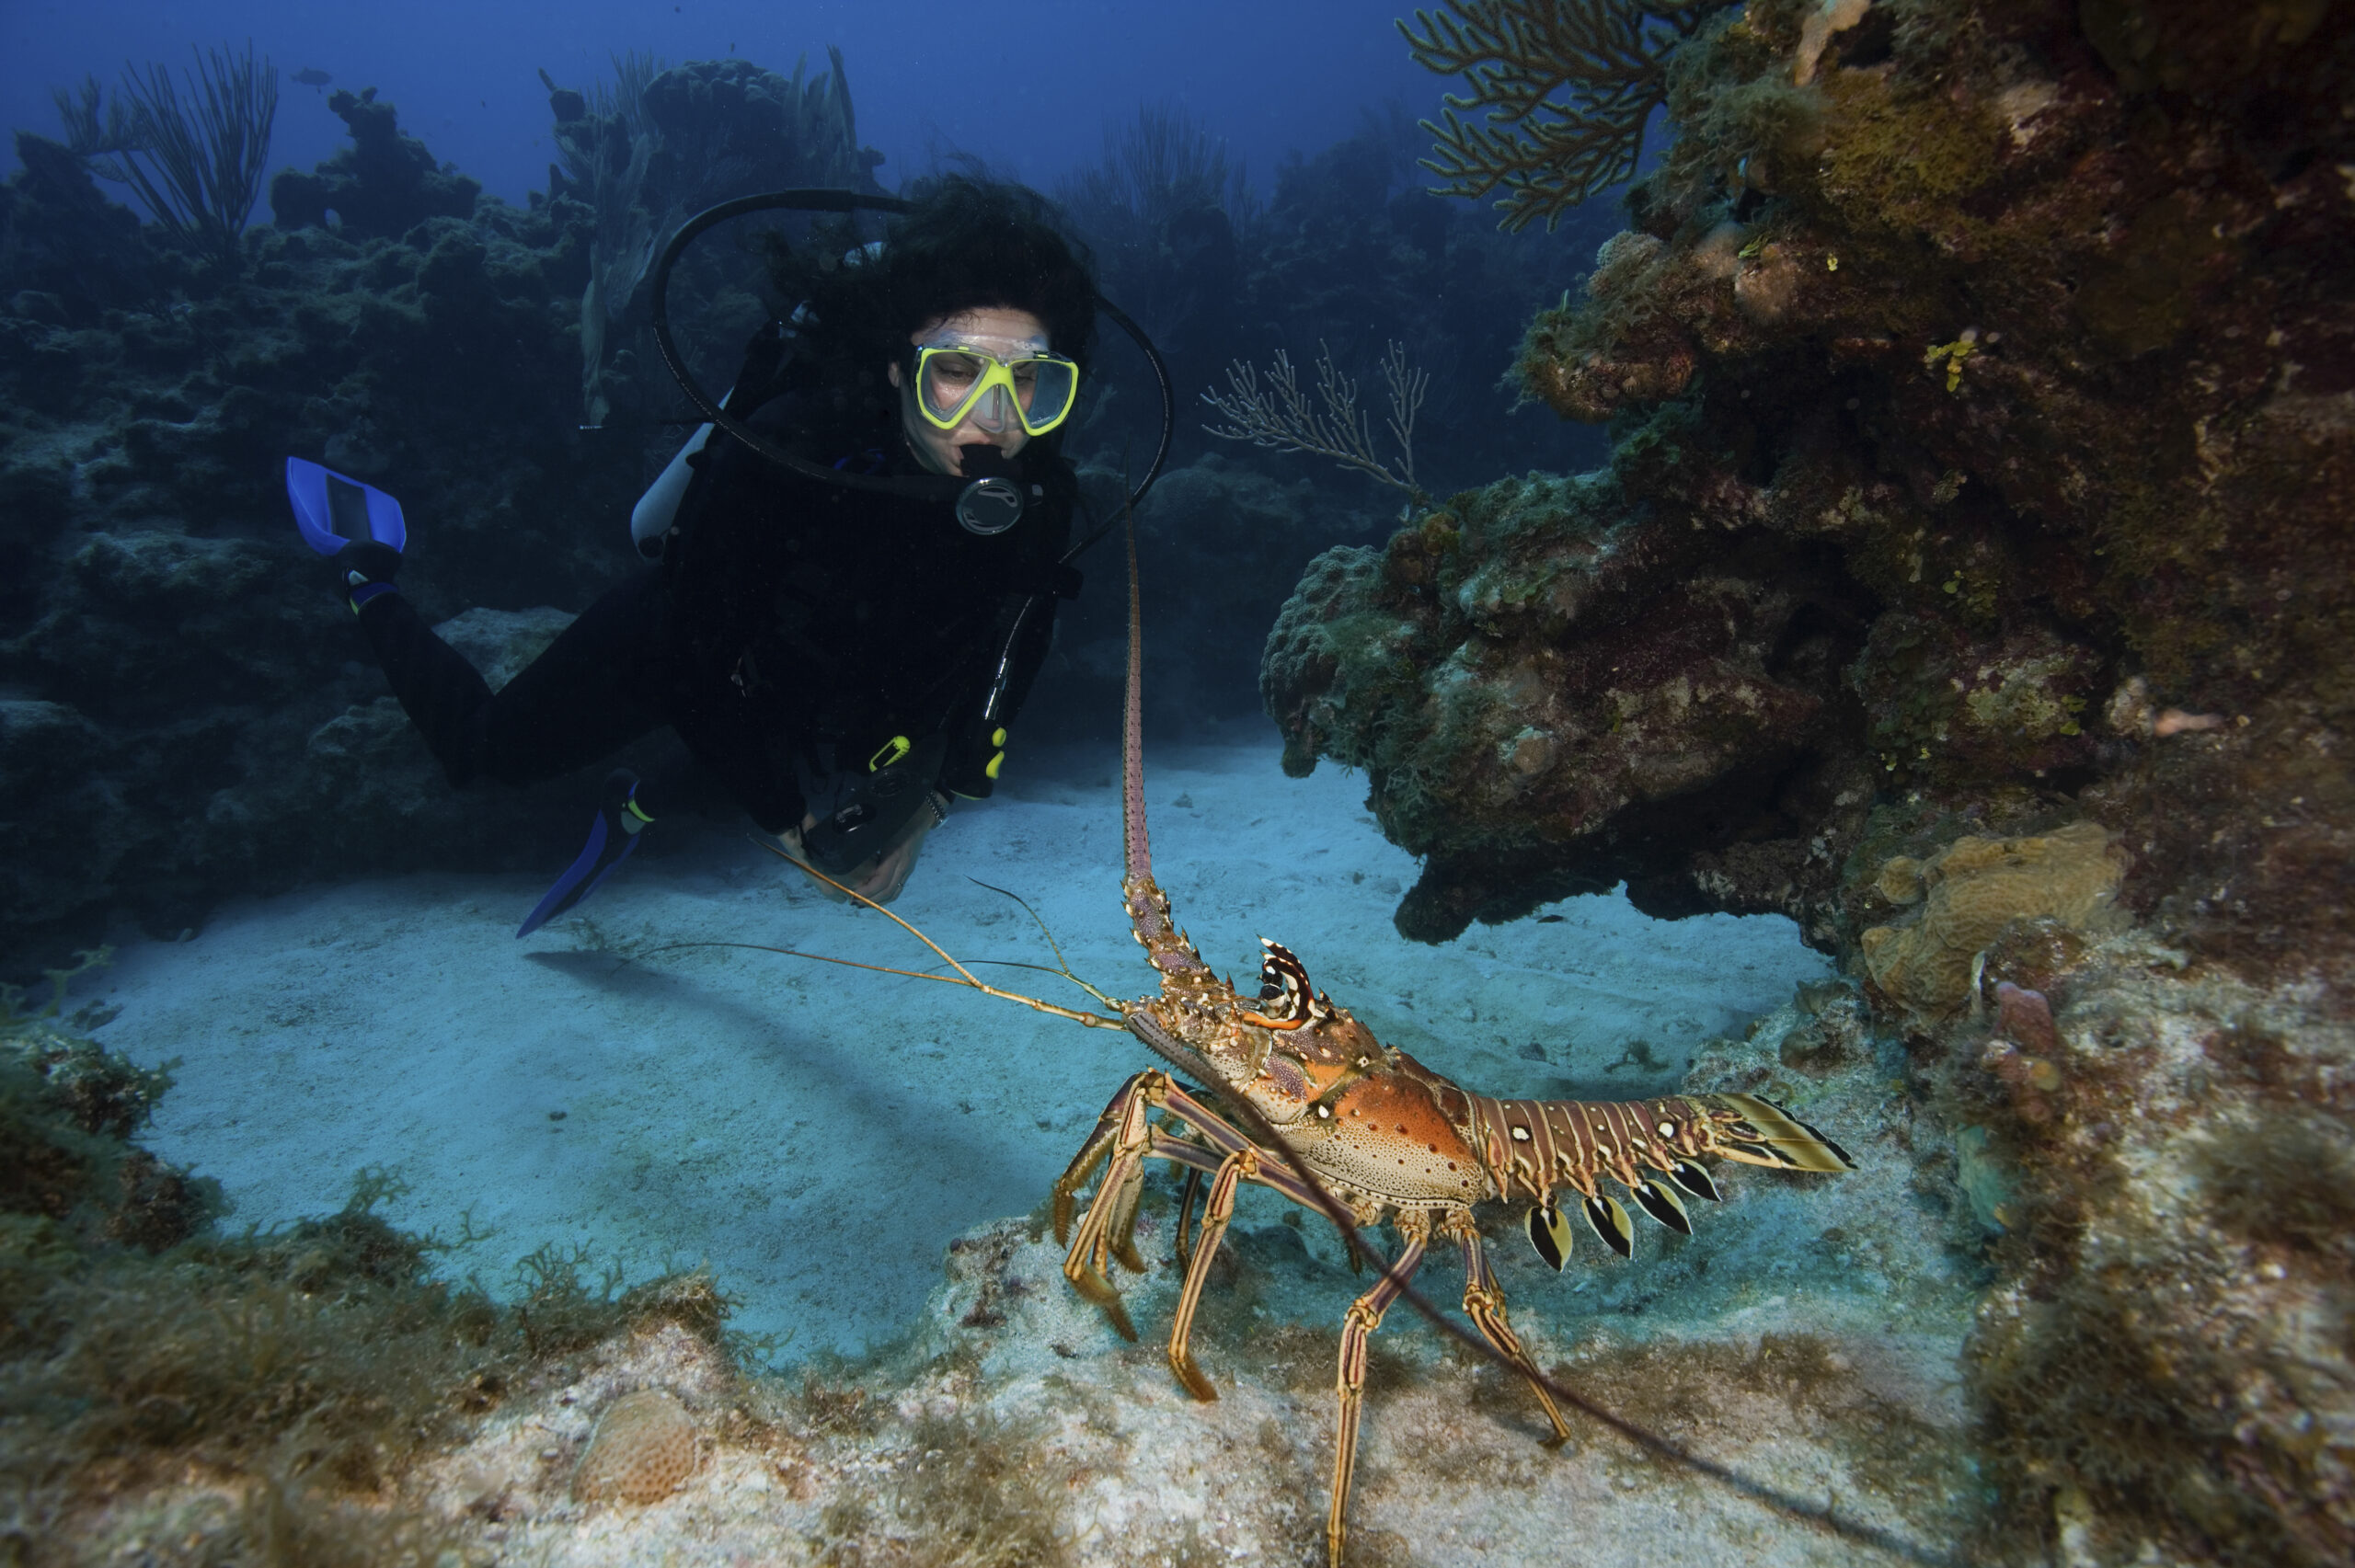 a spiny lobster panulirus argus intimidates a sc 2021 08 28 08 07 35 utc scaled Could Lobsters Help Save Florida's Corals?